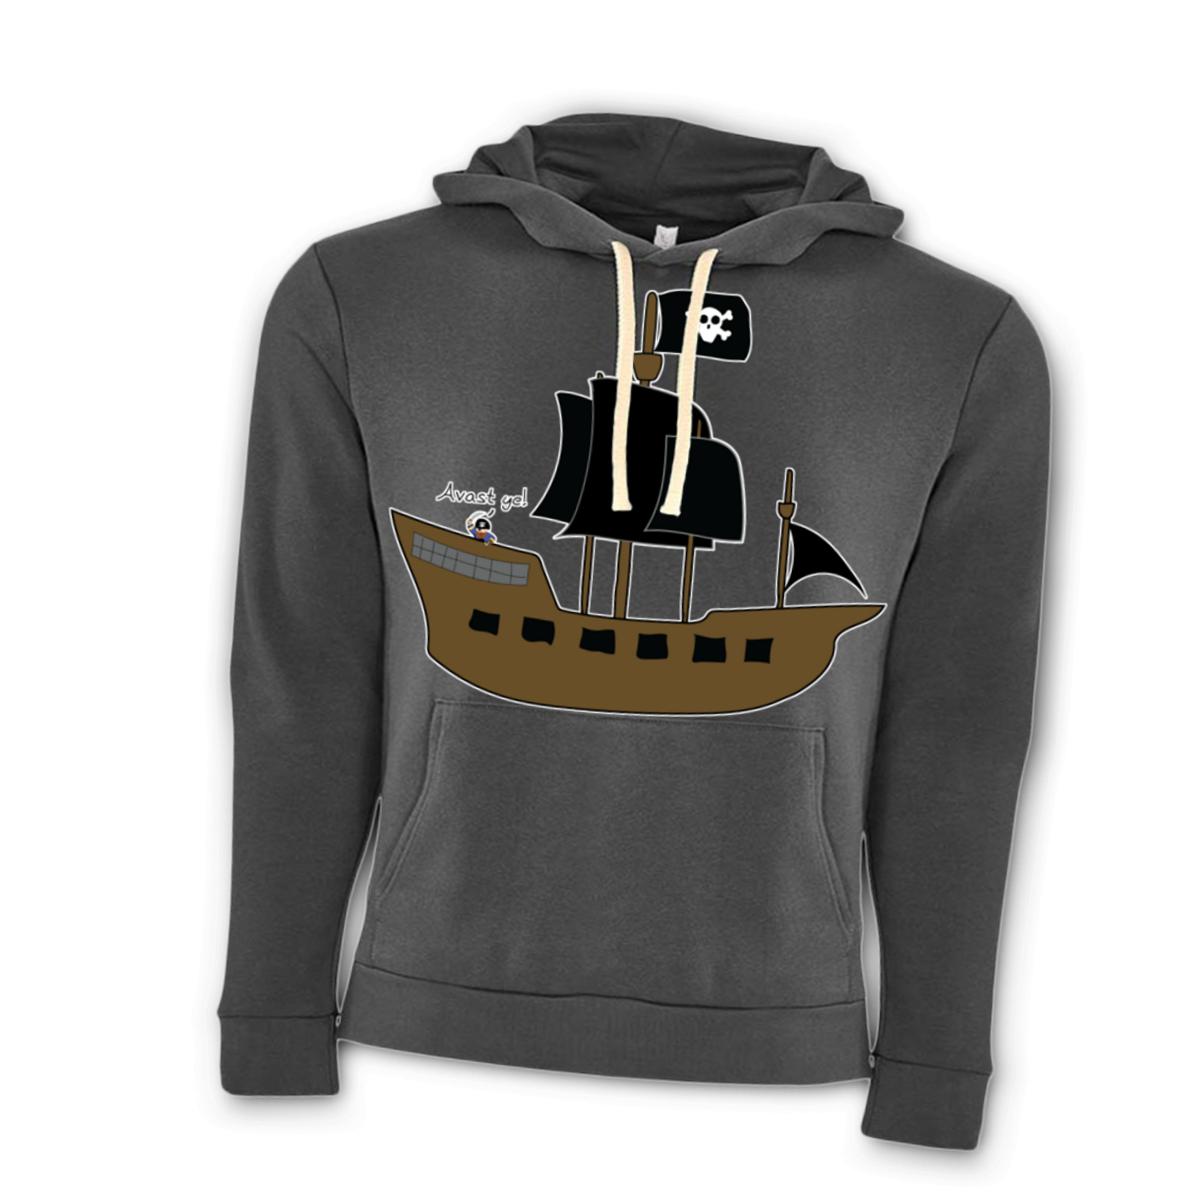 Pirate Ship Unisex Pullover Hoodie Small heavy-metal